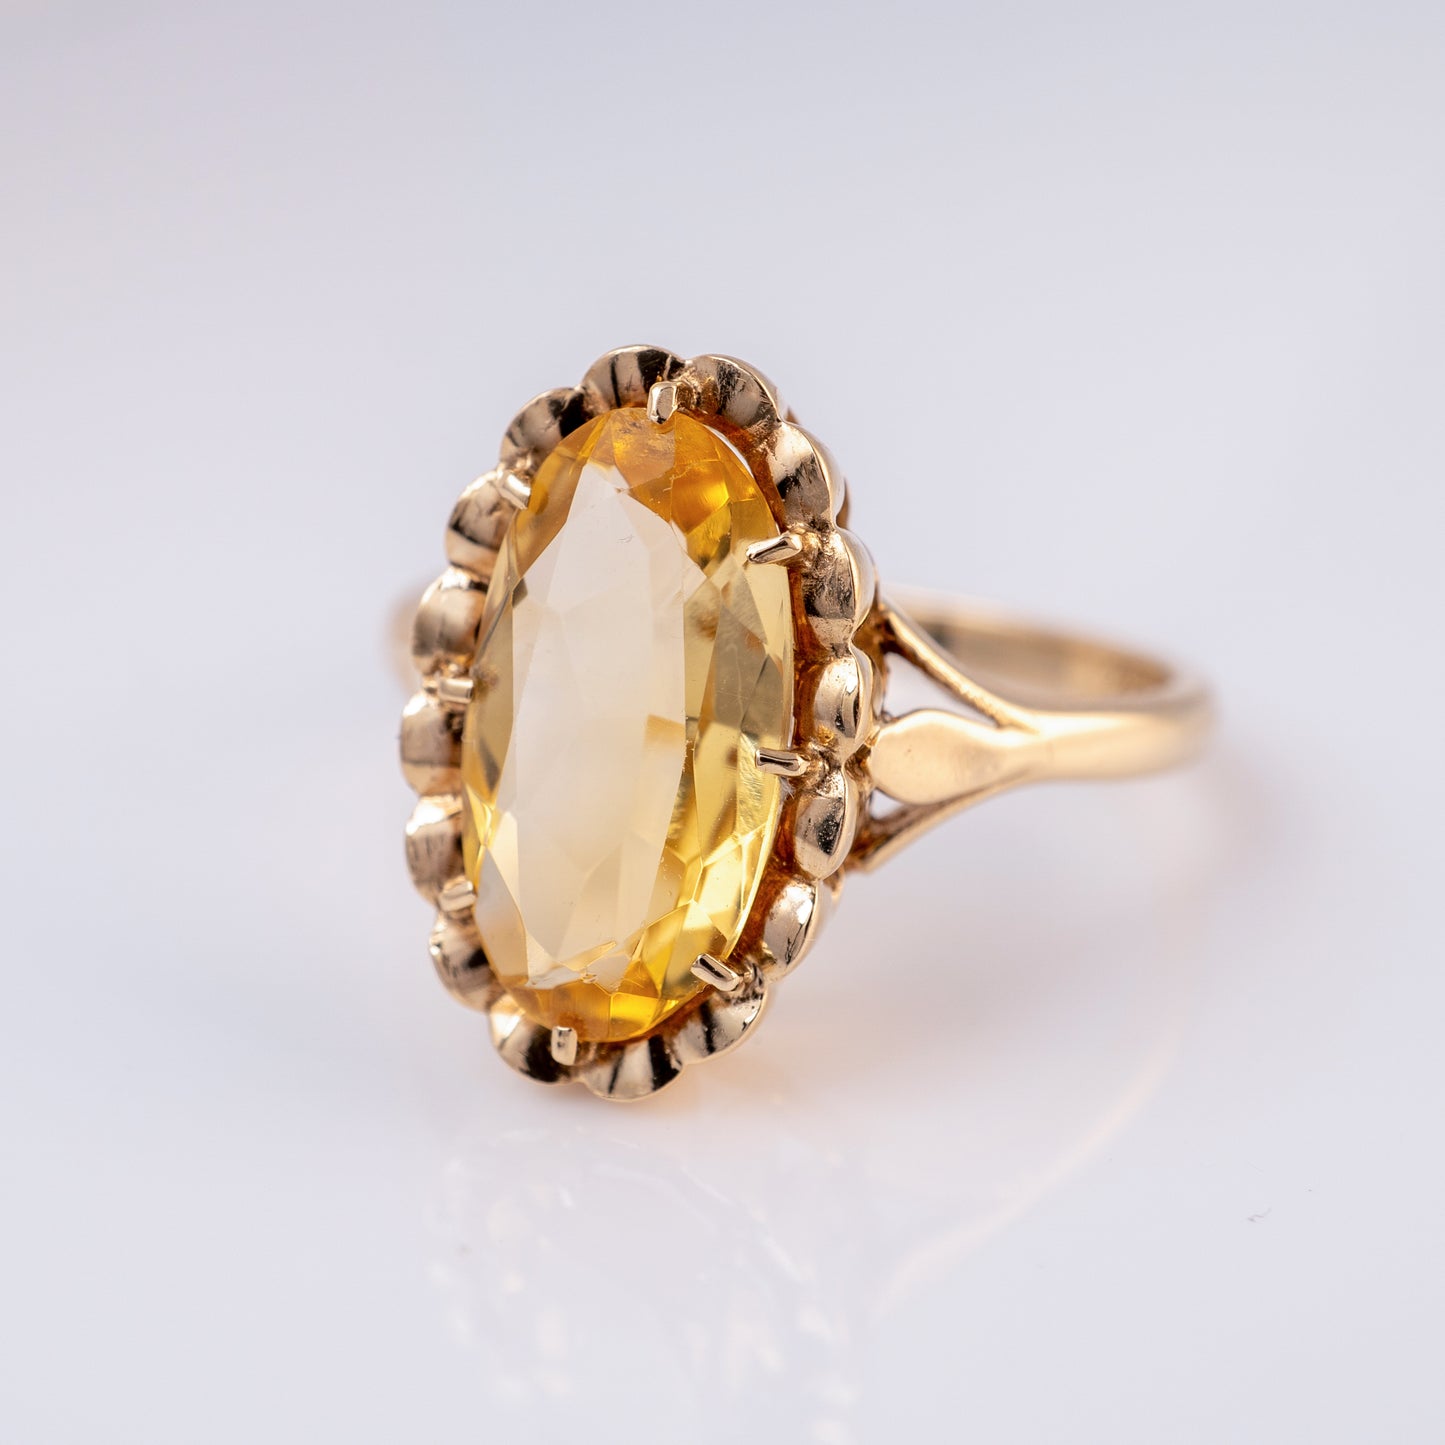 Vintage 9ct Gold Citrine Solitaire Ring - Hunters Fine Jewellery